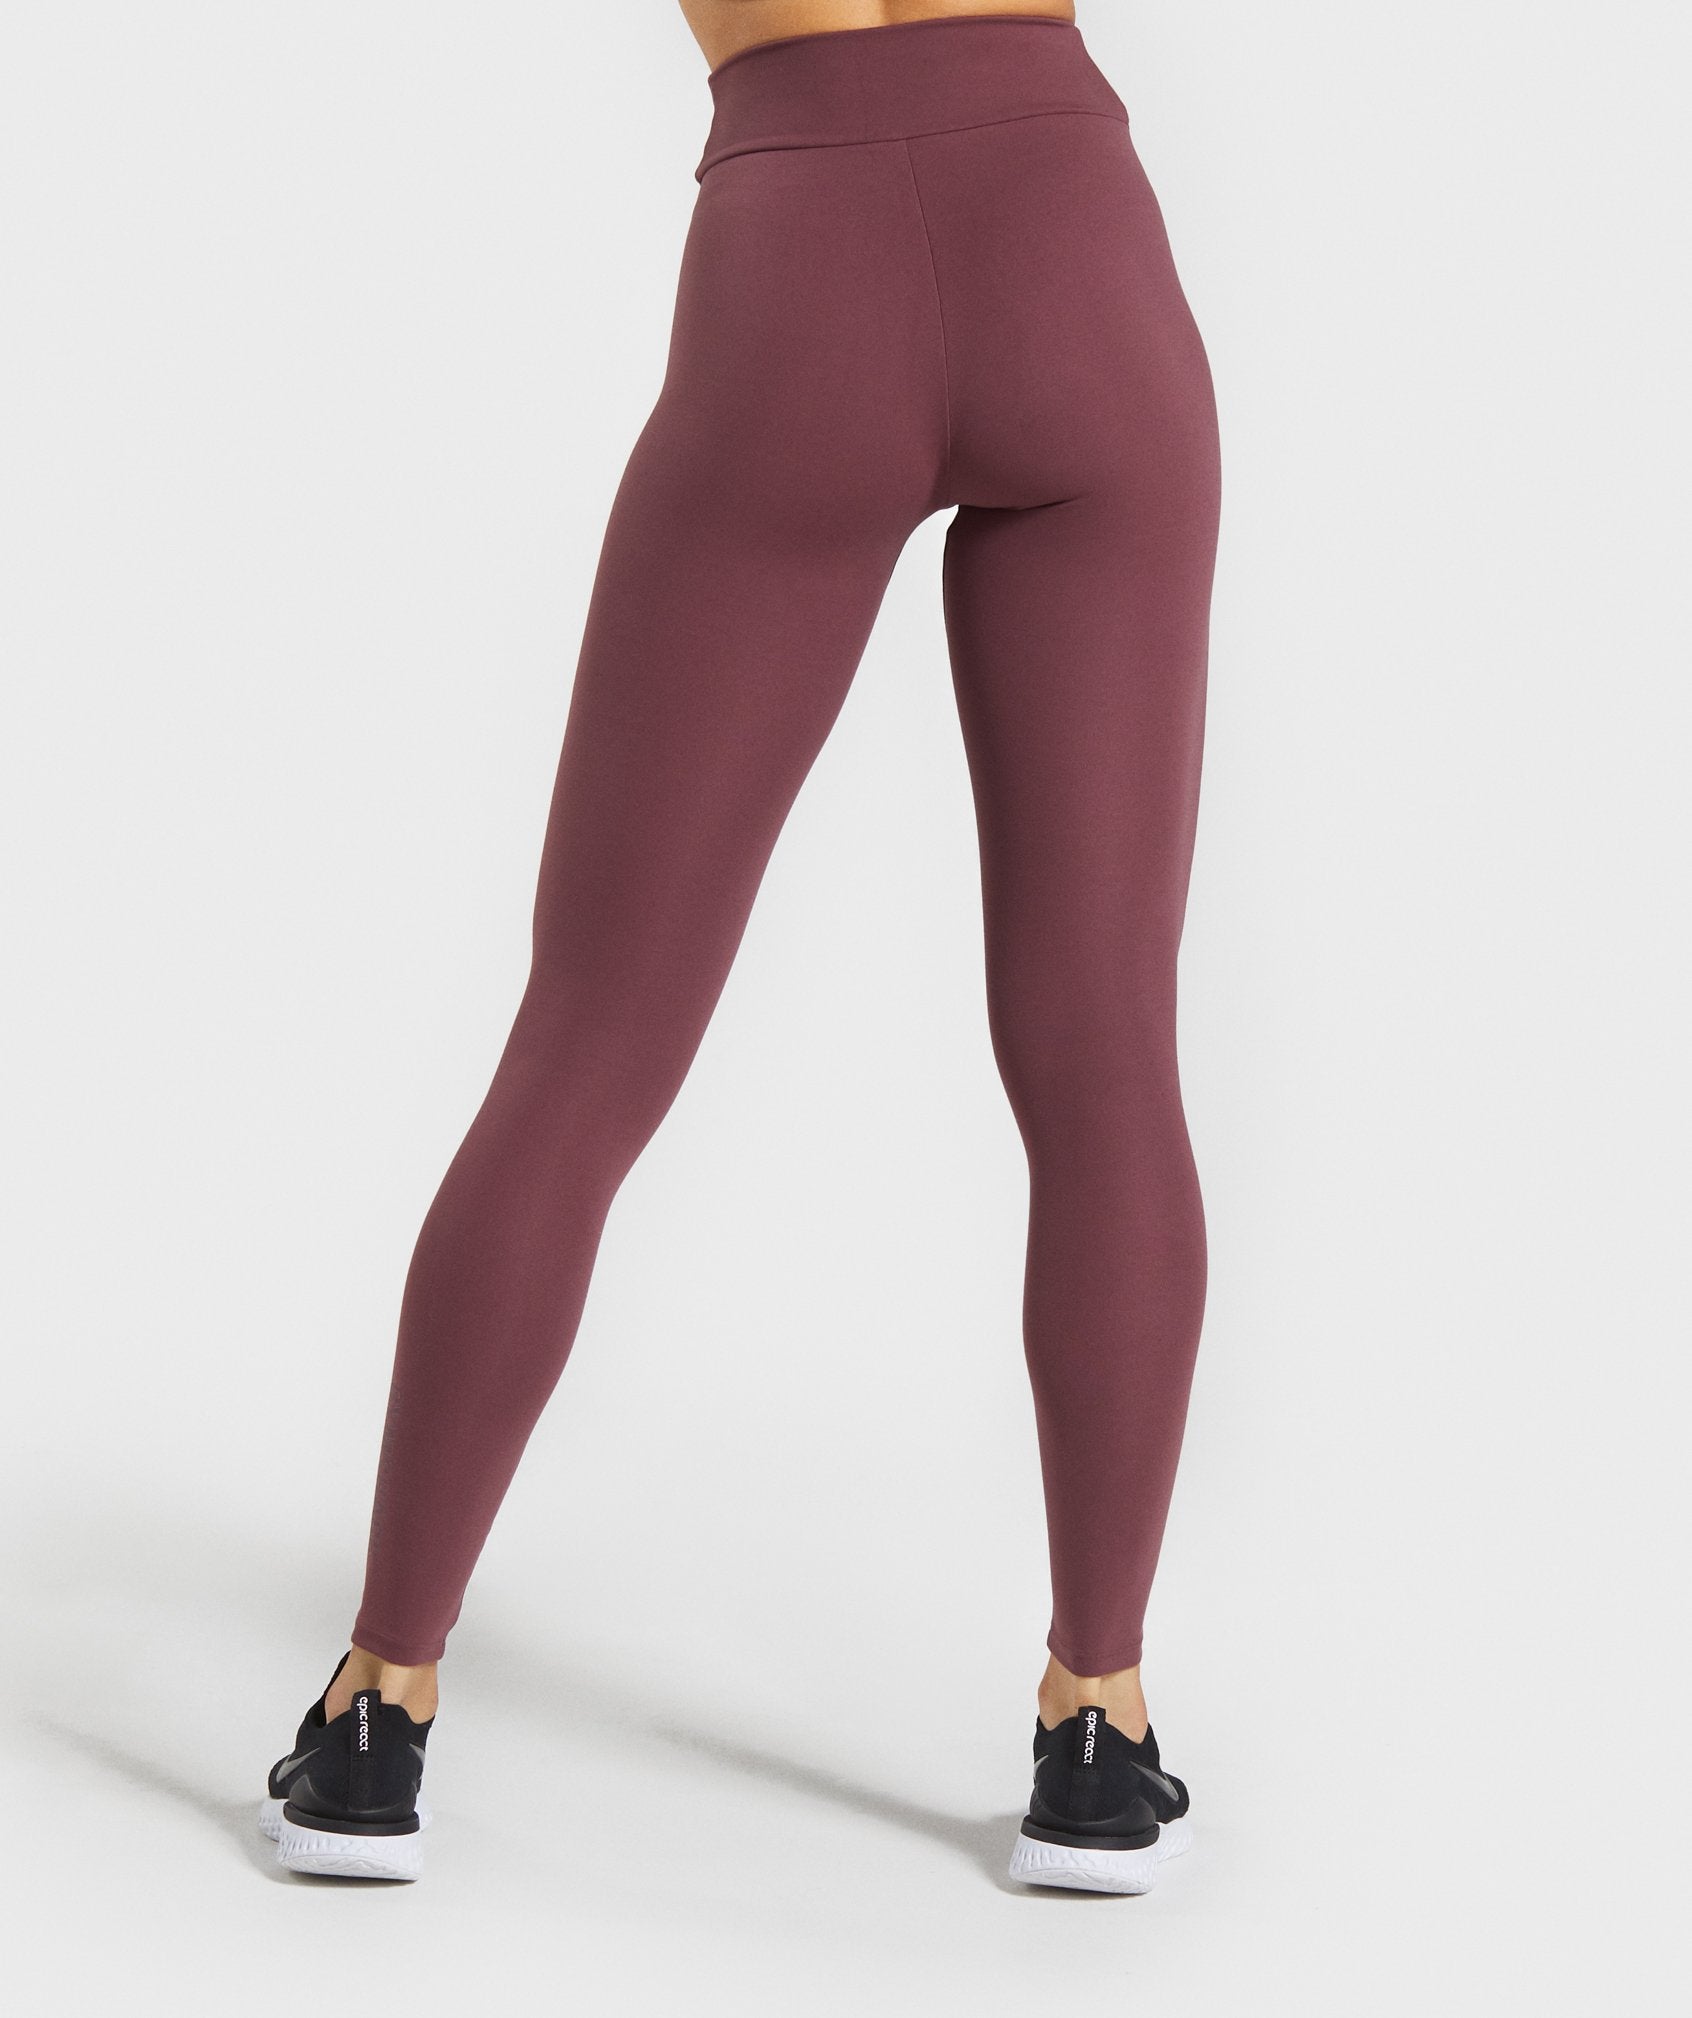 Solo Leggings in Berry Red - view 2